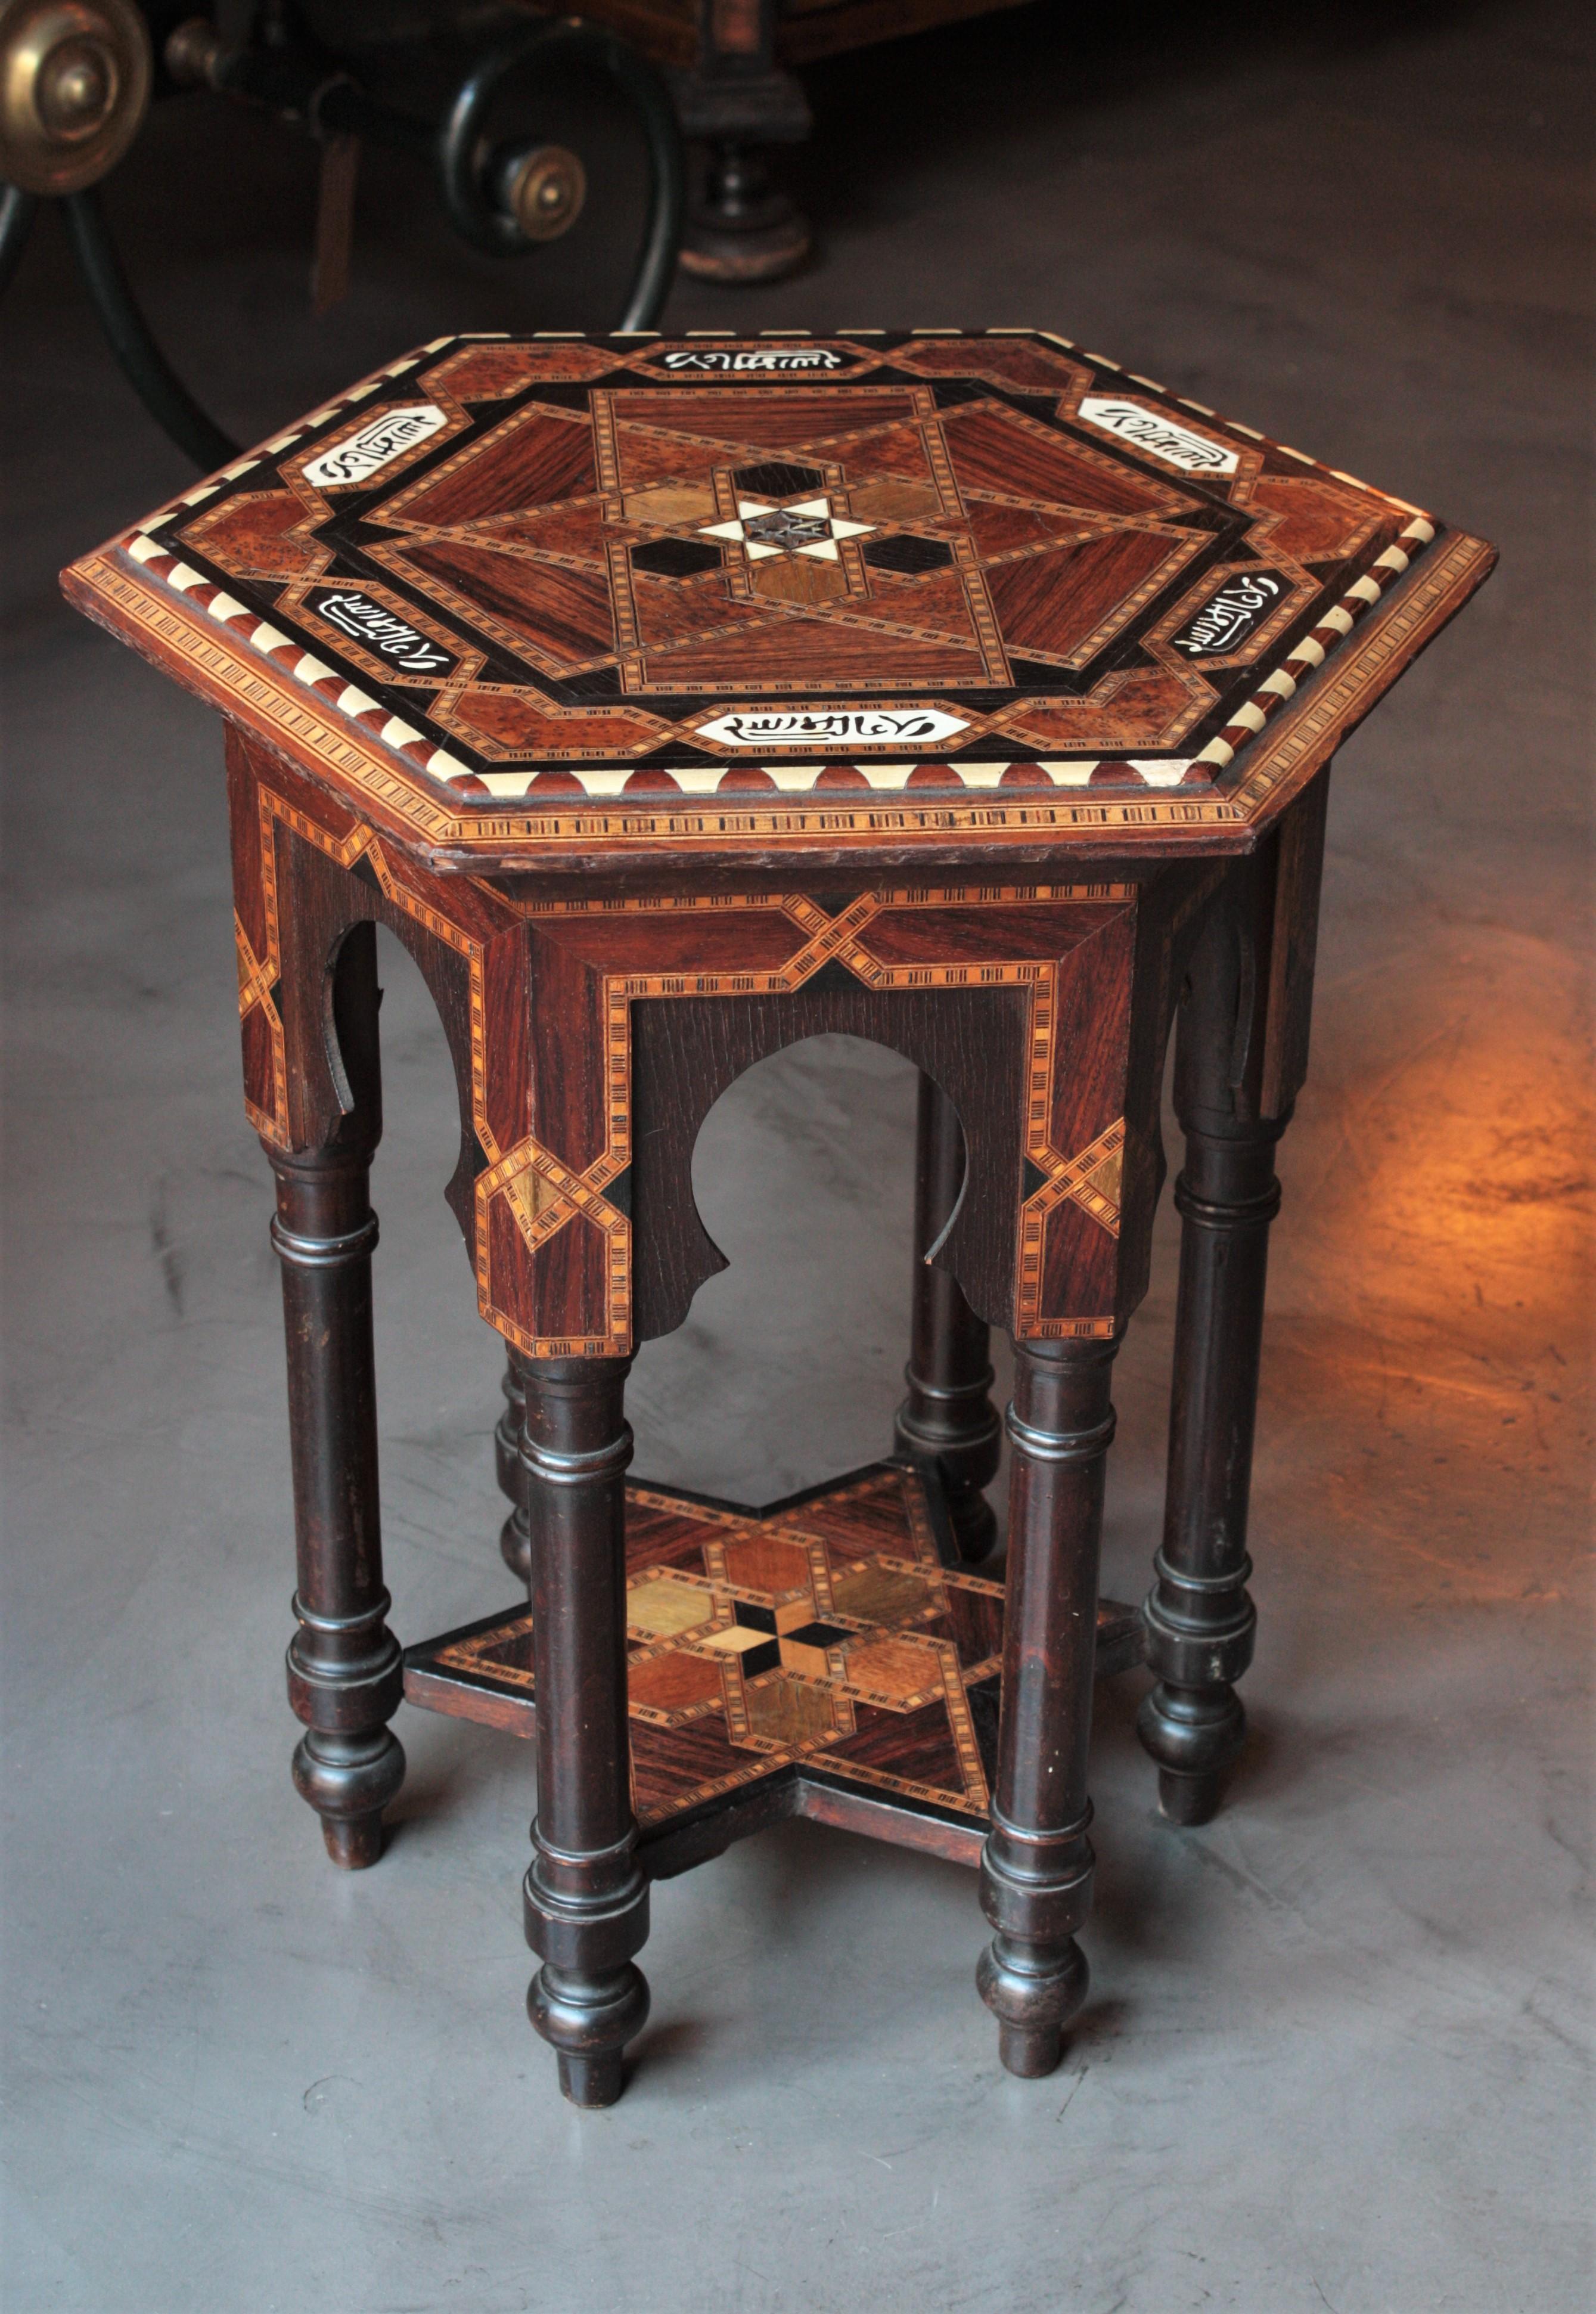 Details about   Moroccan Octagonal Hand Painted Accent Table Moorish Design Furniture End Table 